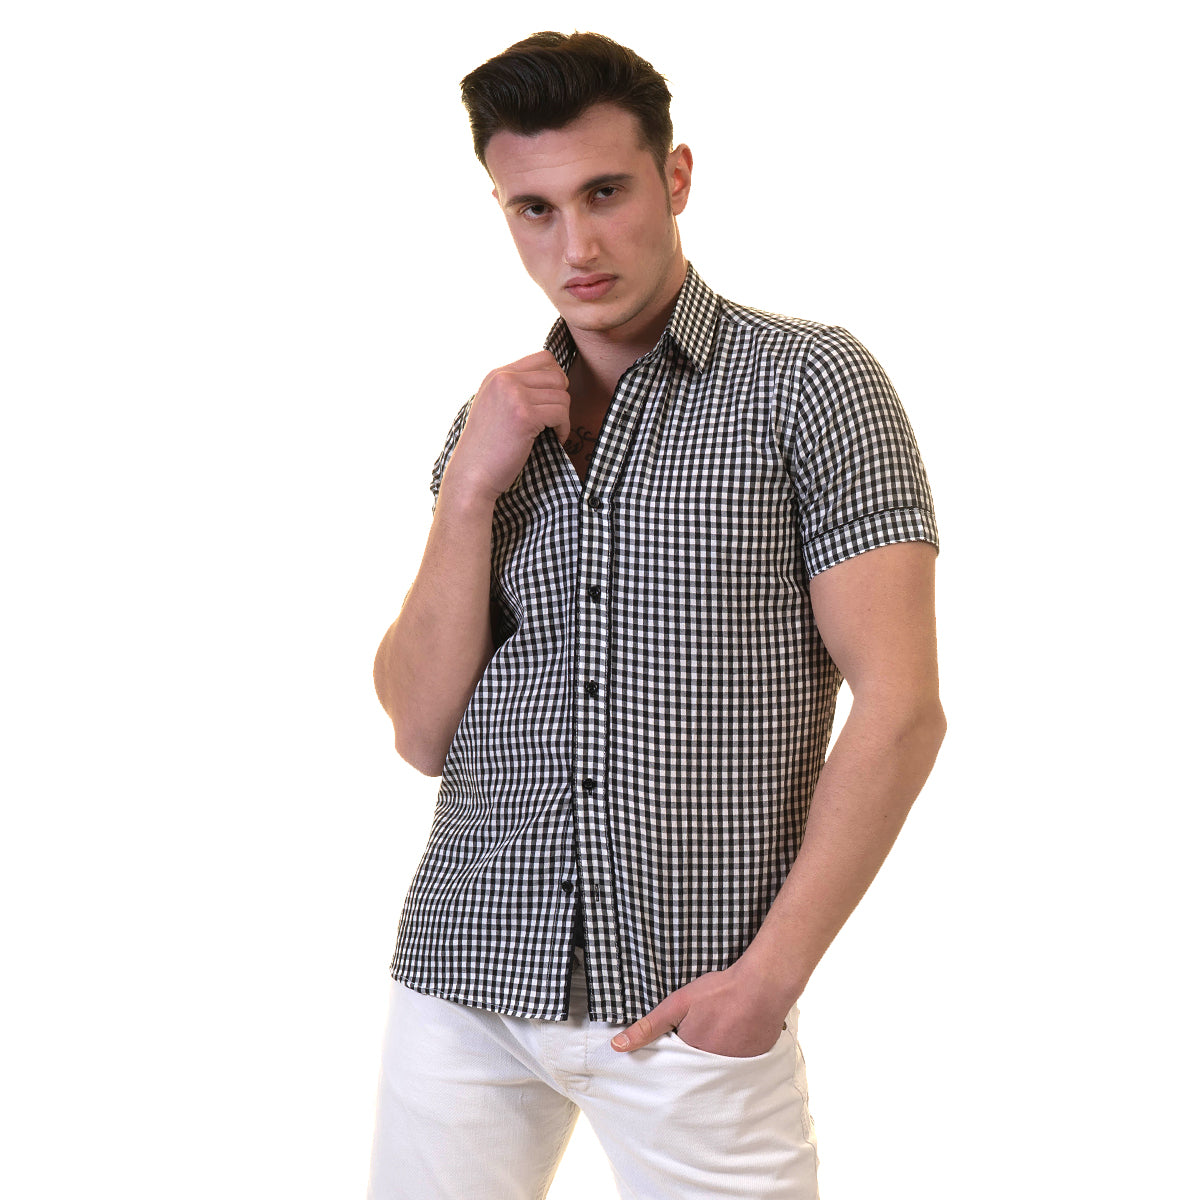 Black and White Mens Short Sleeve Button up Shirts - Tailored Slim Fit Cotton Dress Shirts